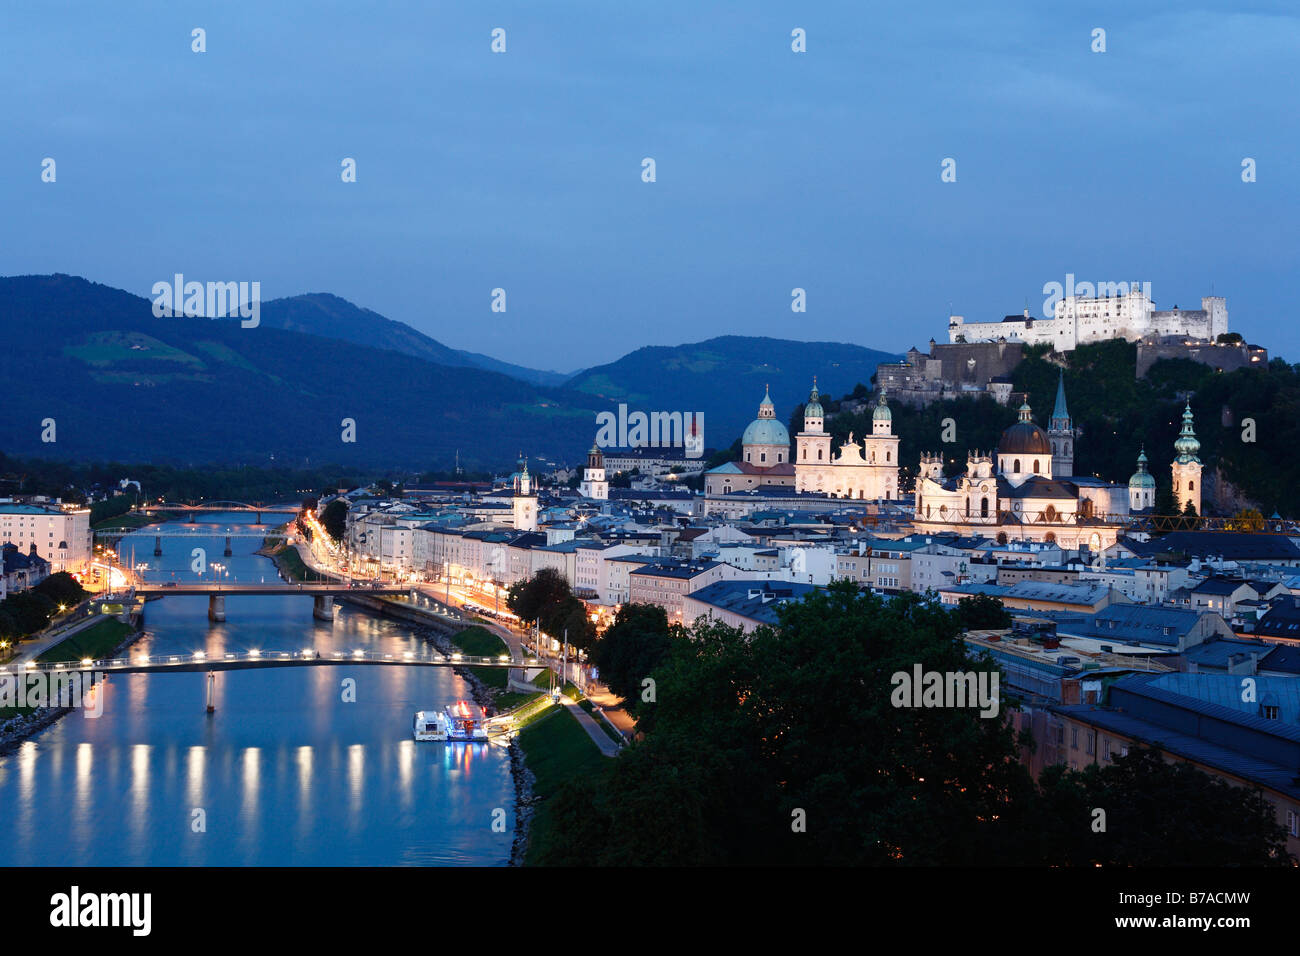 Historic district of Salzburg with Salzach River, Festung Hohensalzburg Fortress, view from Moenchsberg Hill, Humboldt-Terrace, Stock Photo